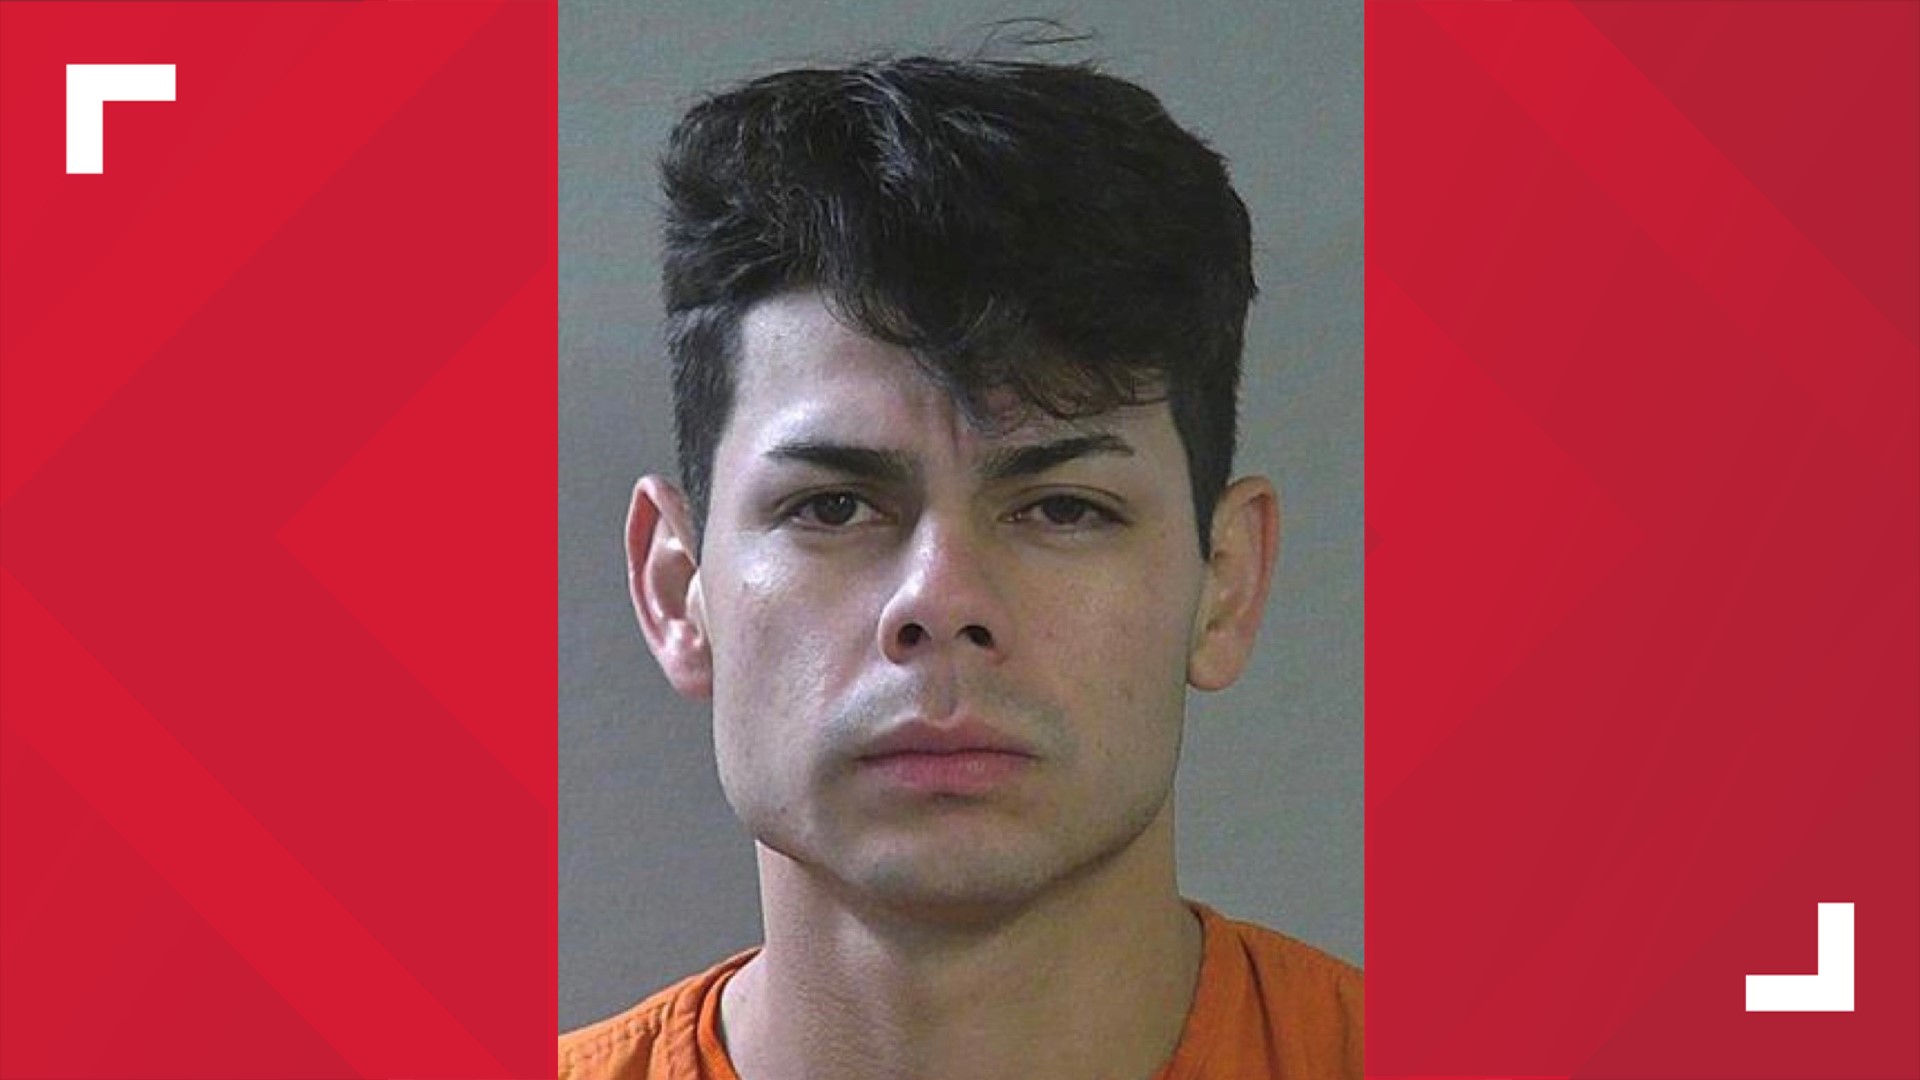 Simon Sarmiento was wanted in connection with the kidnapping and beating death of Luis Garcia.